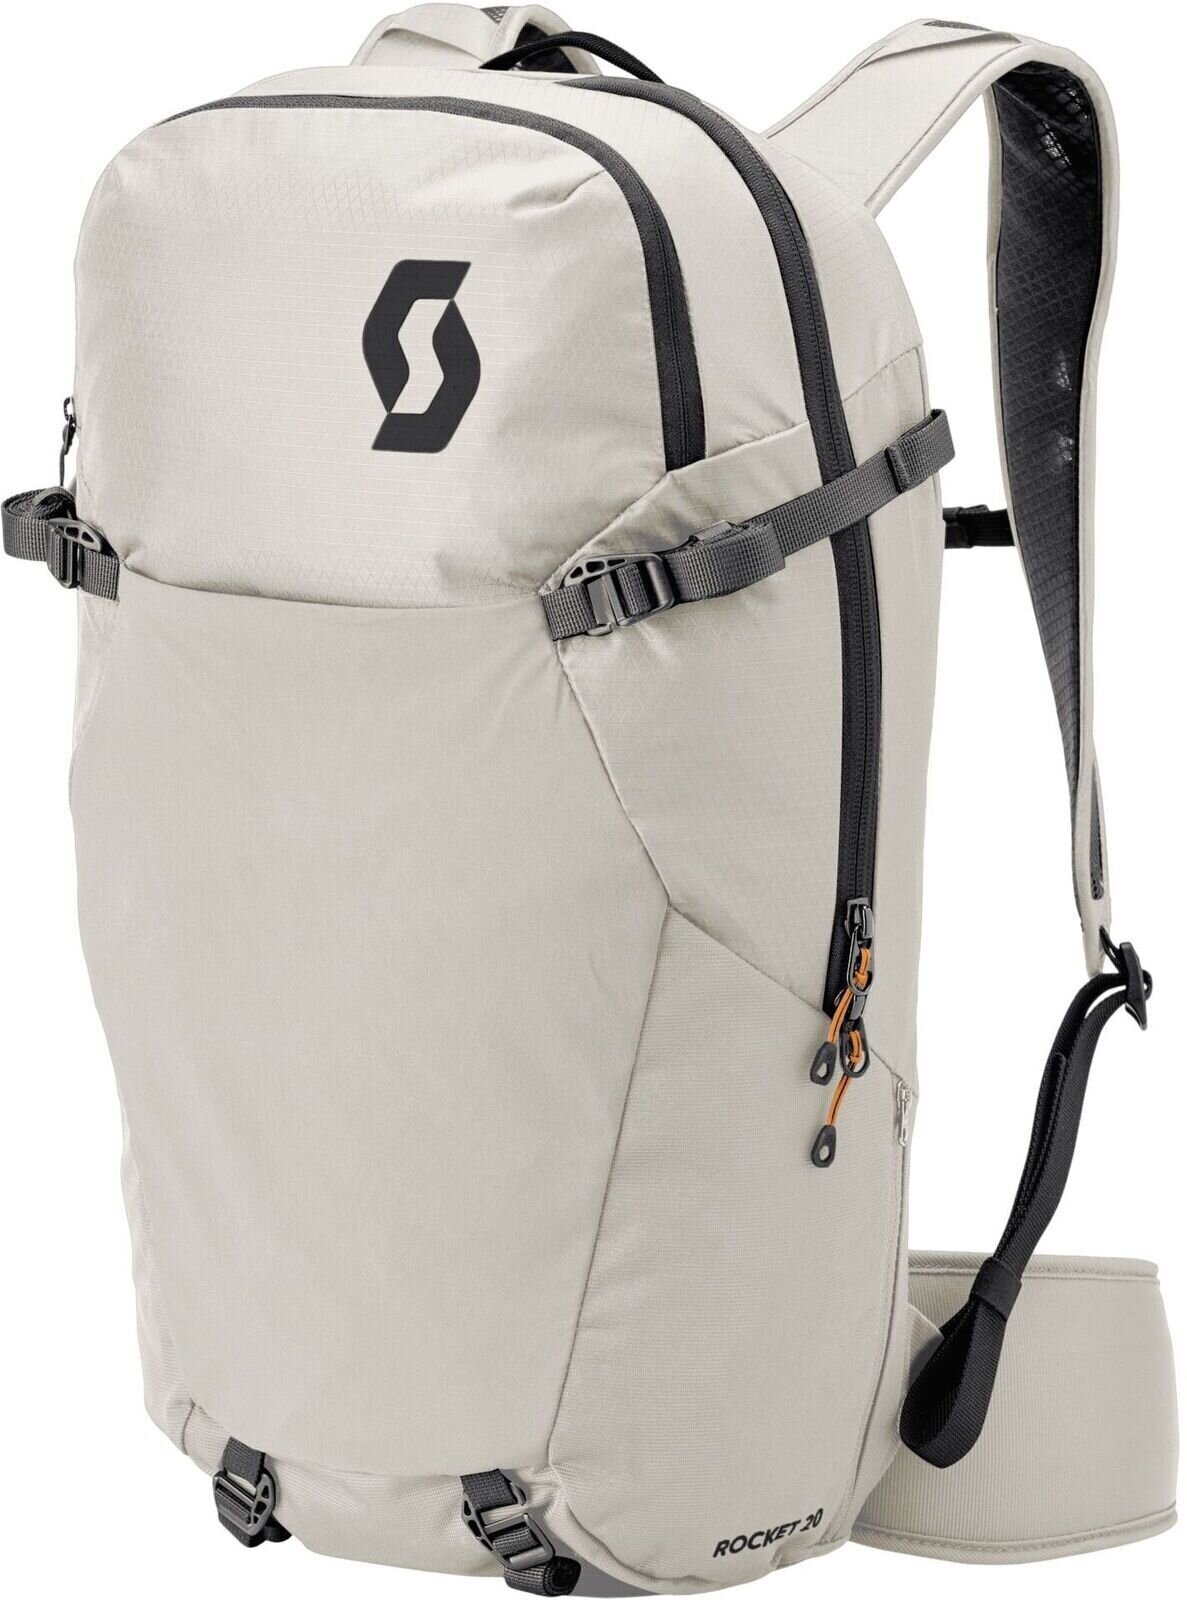 Cycling backpack and accessories Scott Trail Rocket 20 Backpack White Backpack